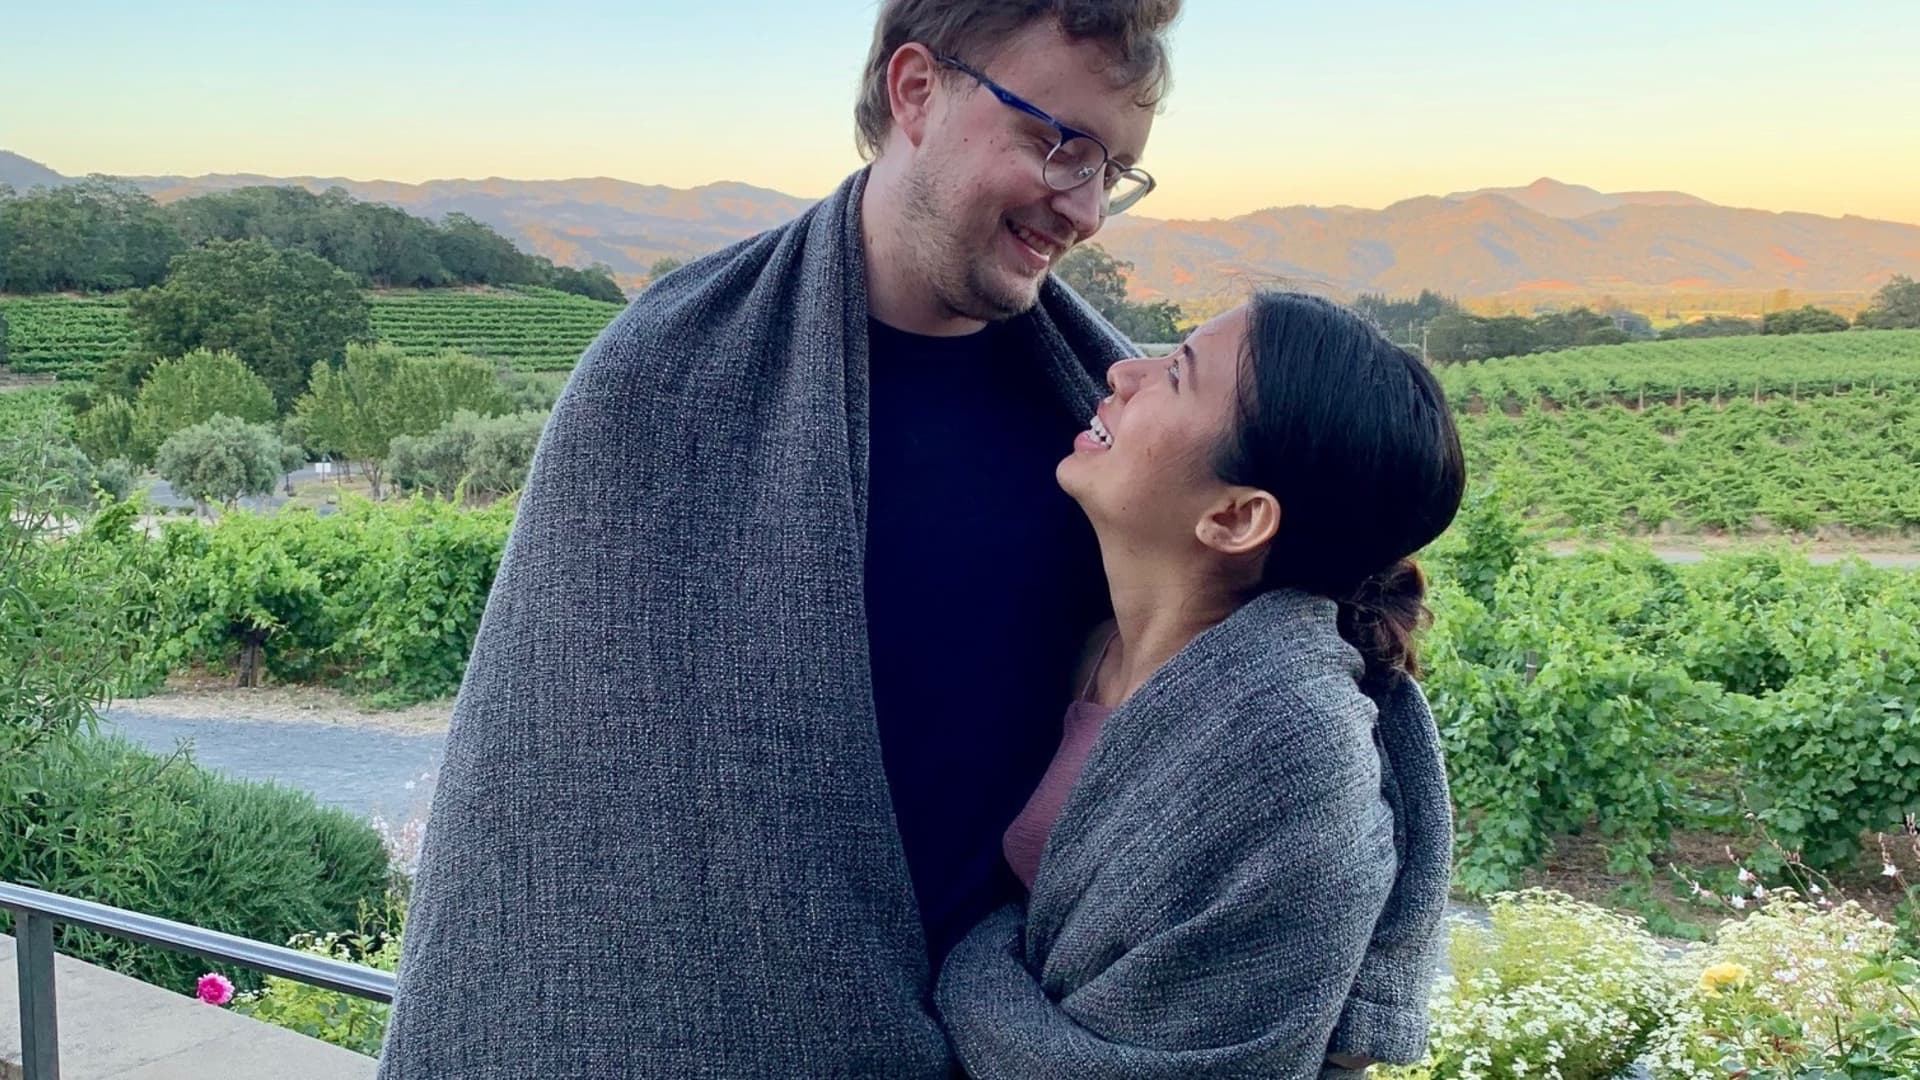 Lani Huang and her boyfriend, Andrew, have been dating for almost two years and moved in together in February.